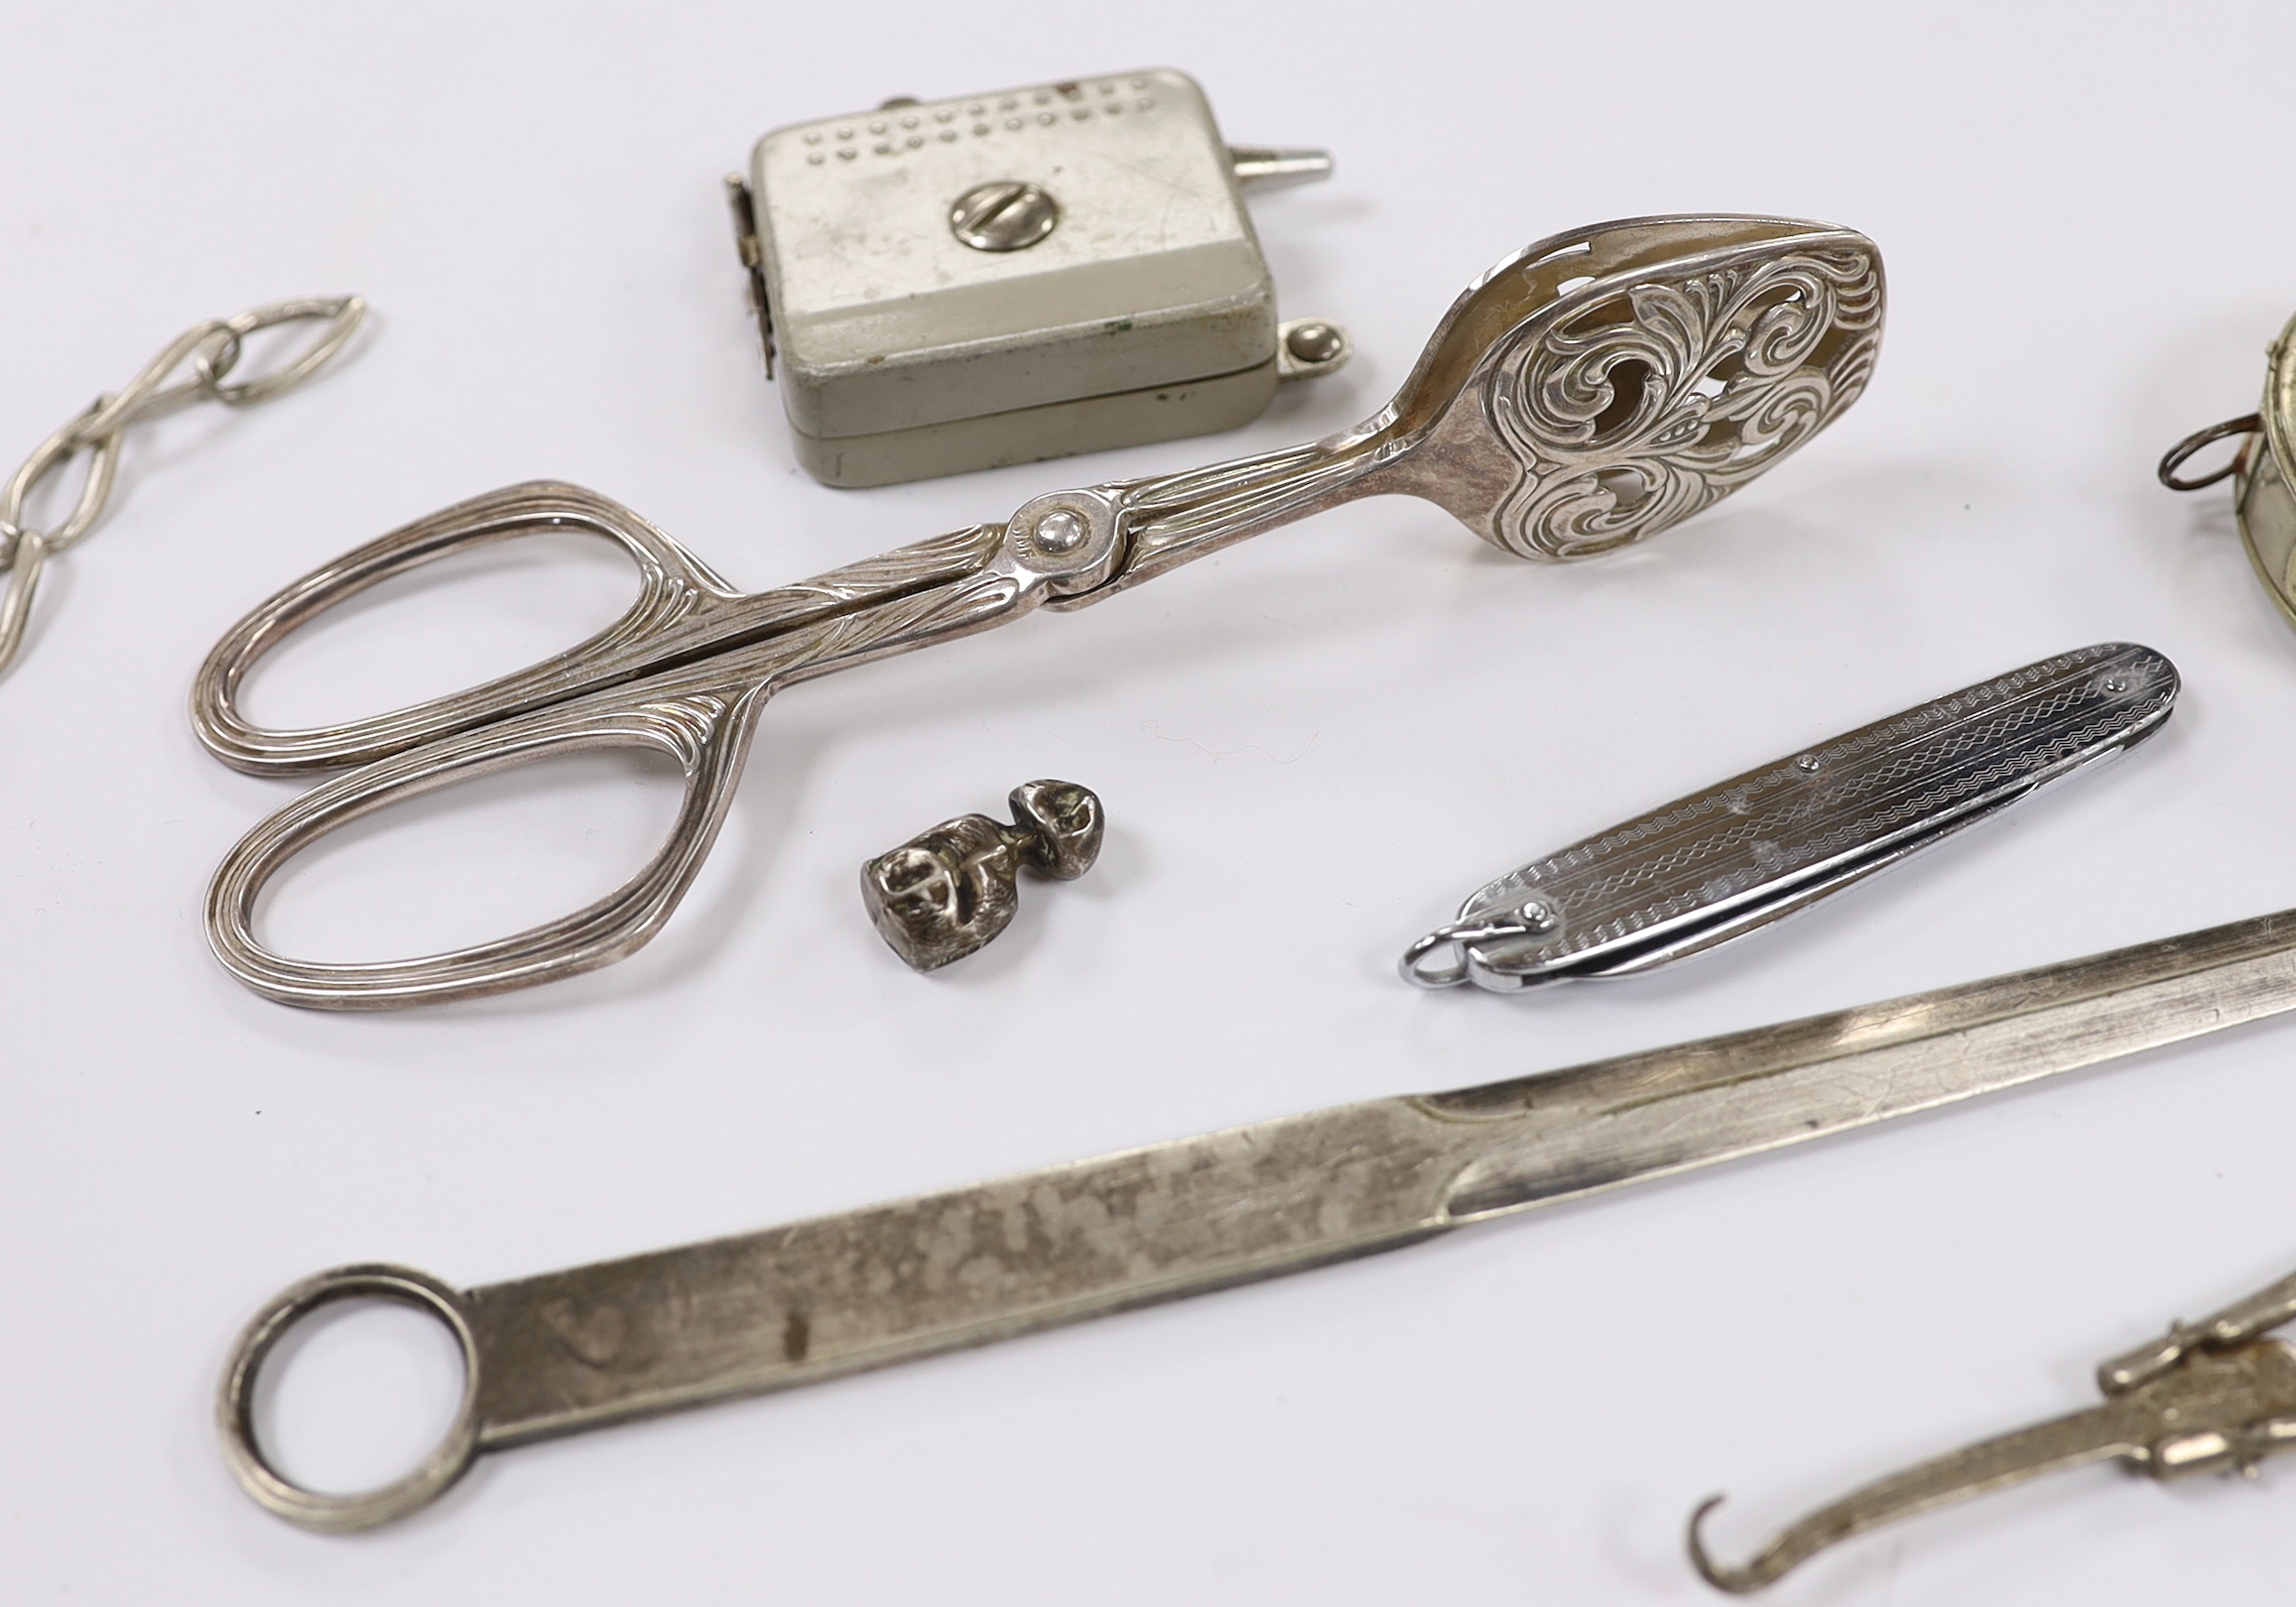 A Chestermans cattle gauge, WMF sugar nips and other various collectables including silver